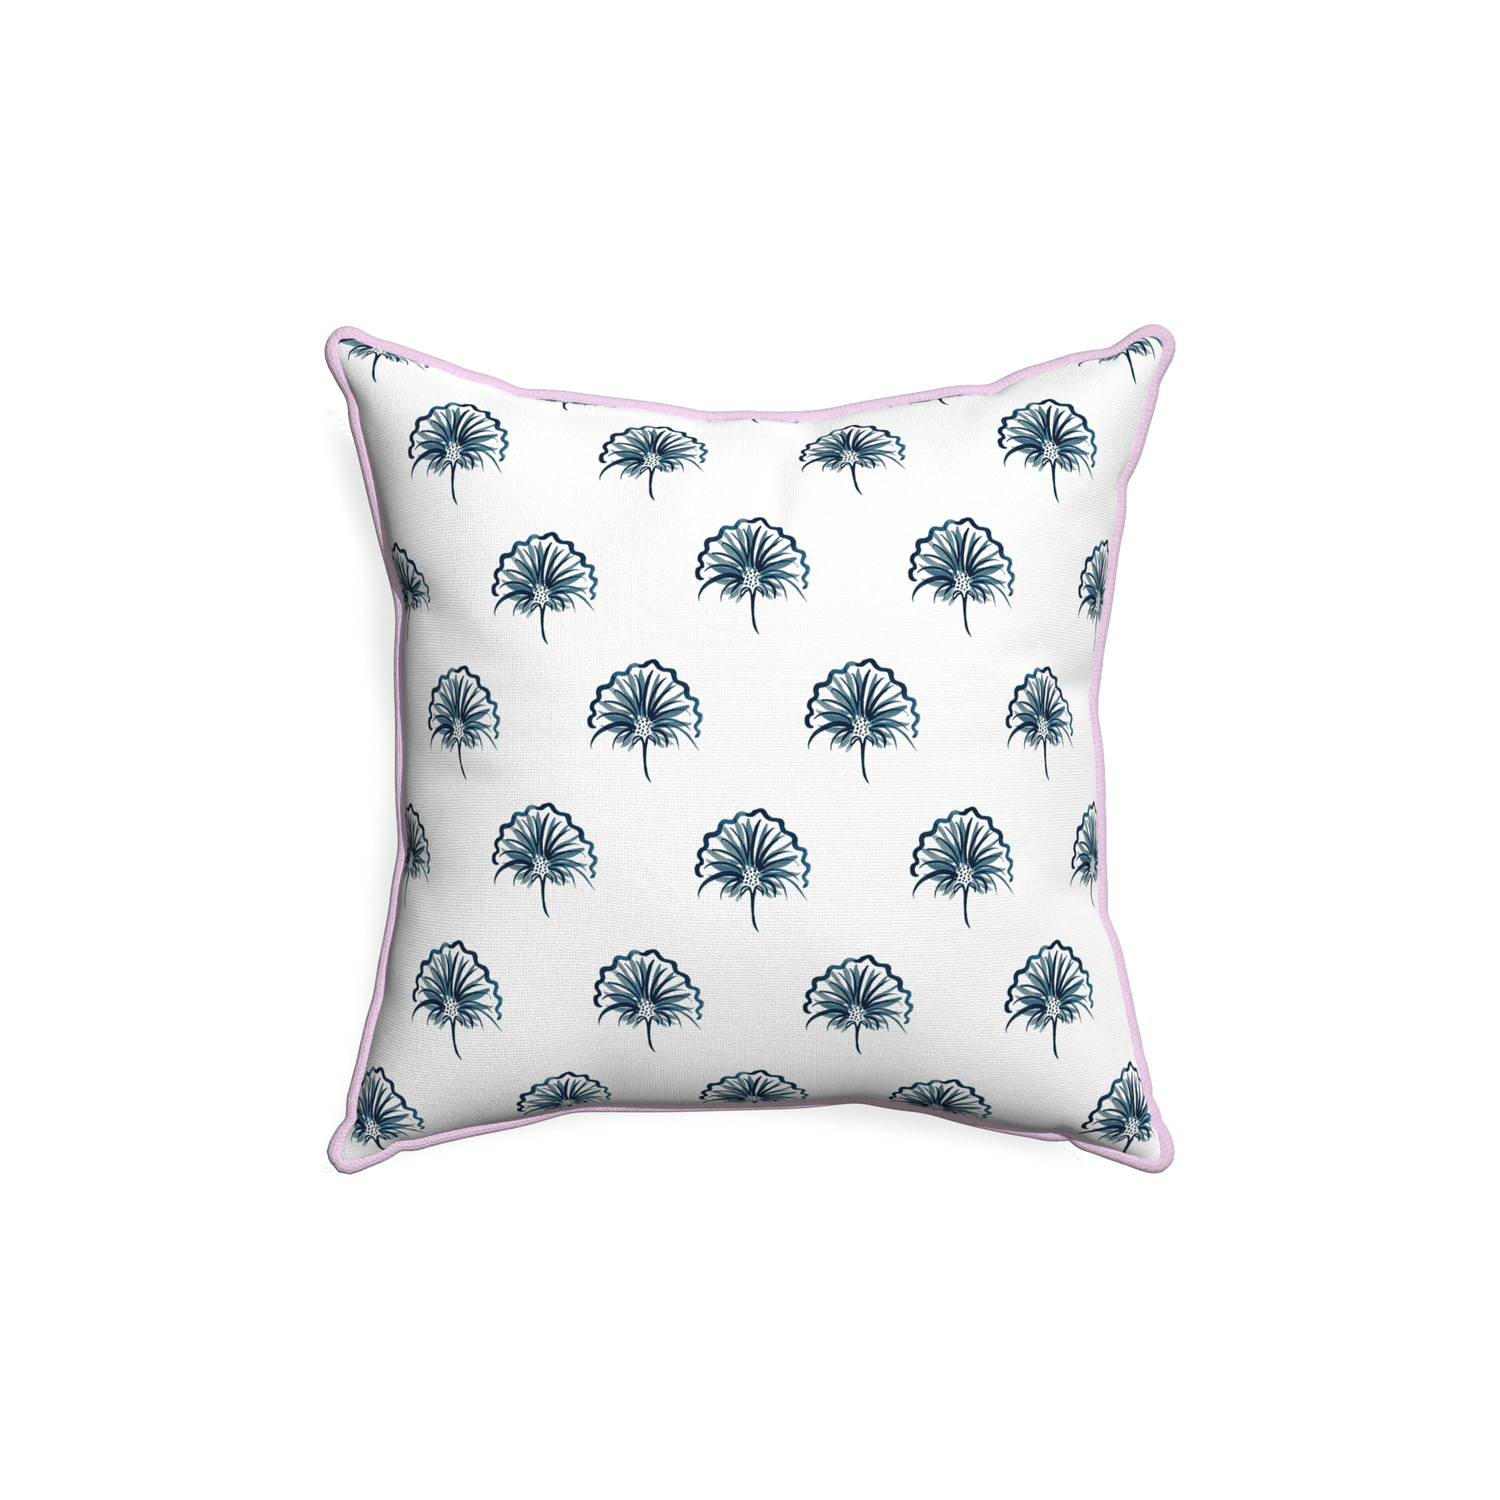 18-square penelope midnight custom floral navypillow with l piping on white background